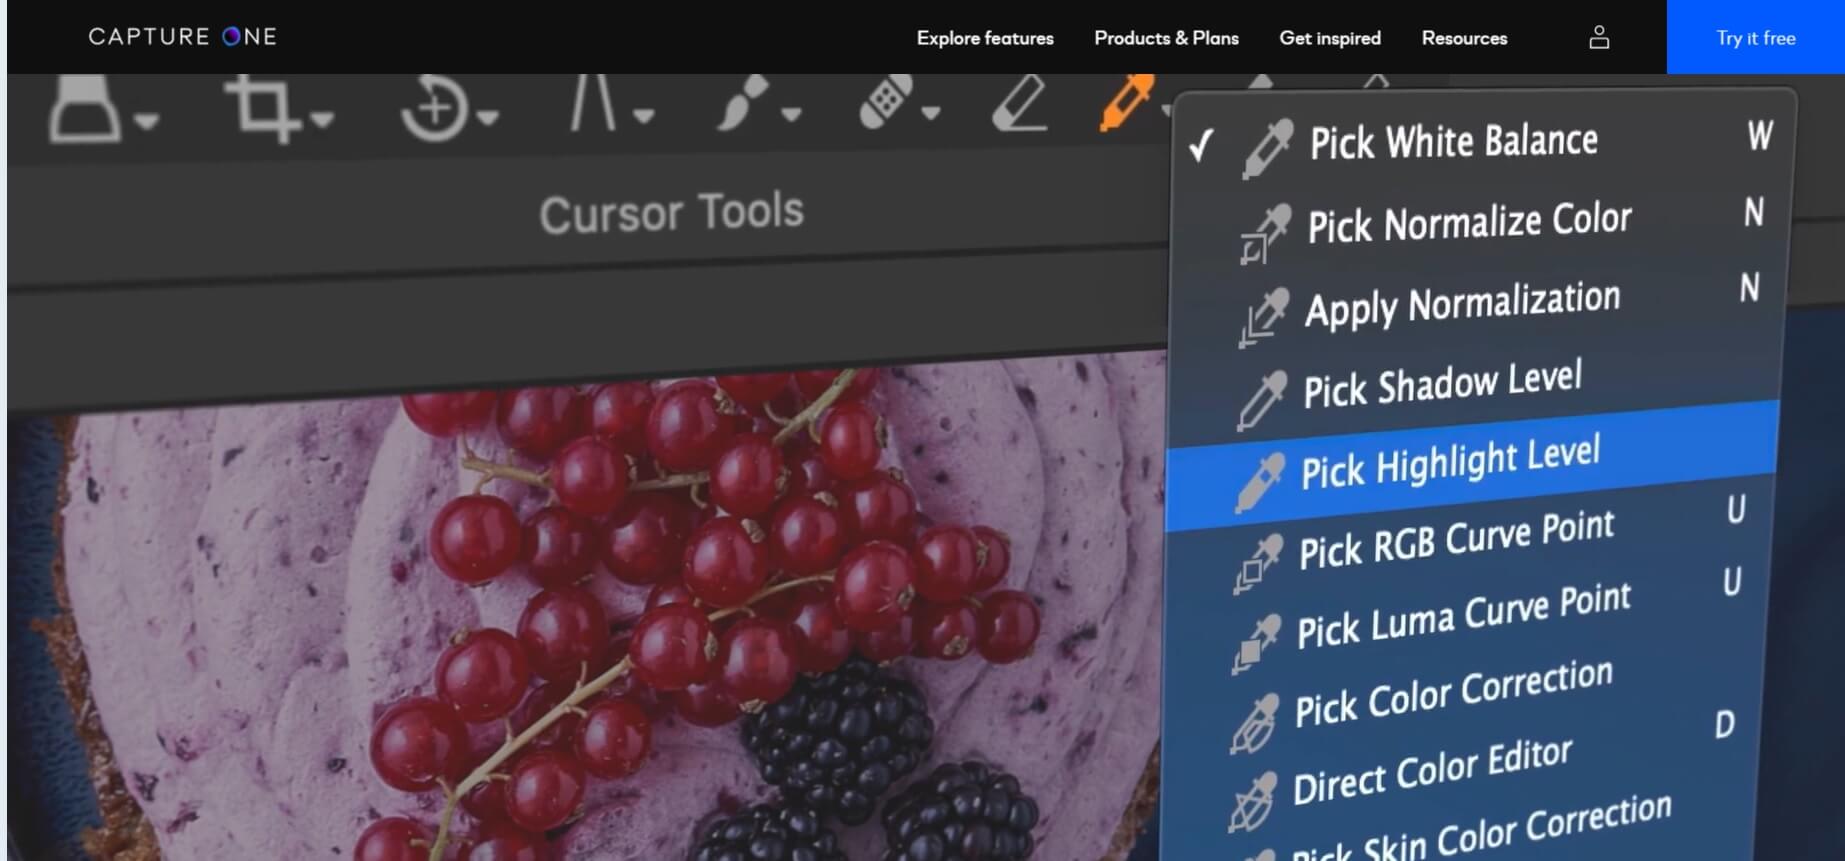 Capture one image editing software